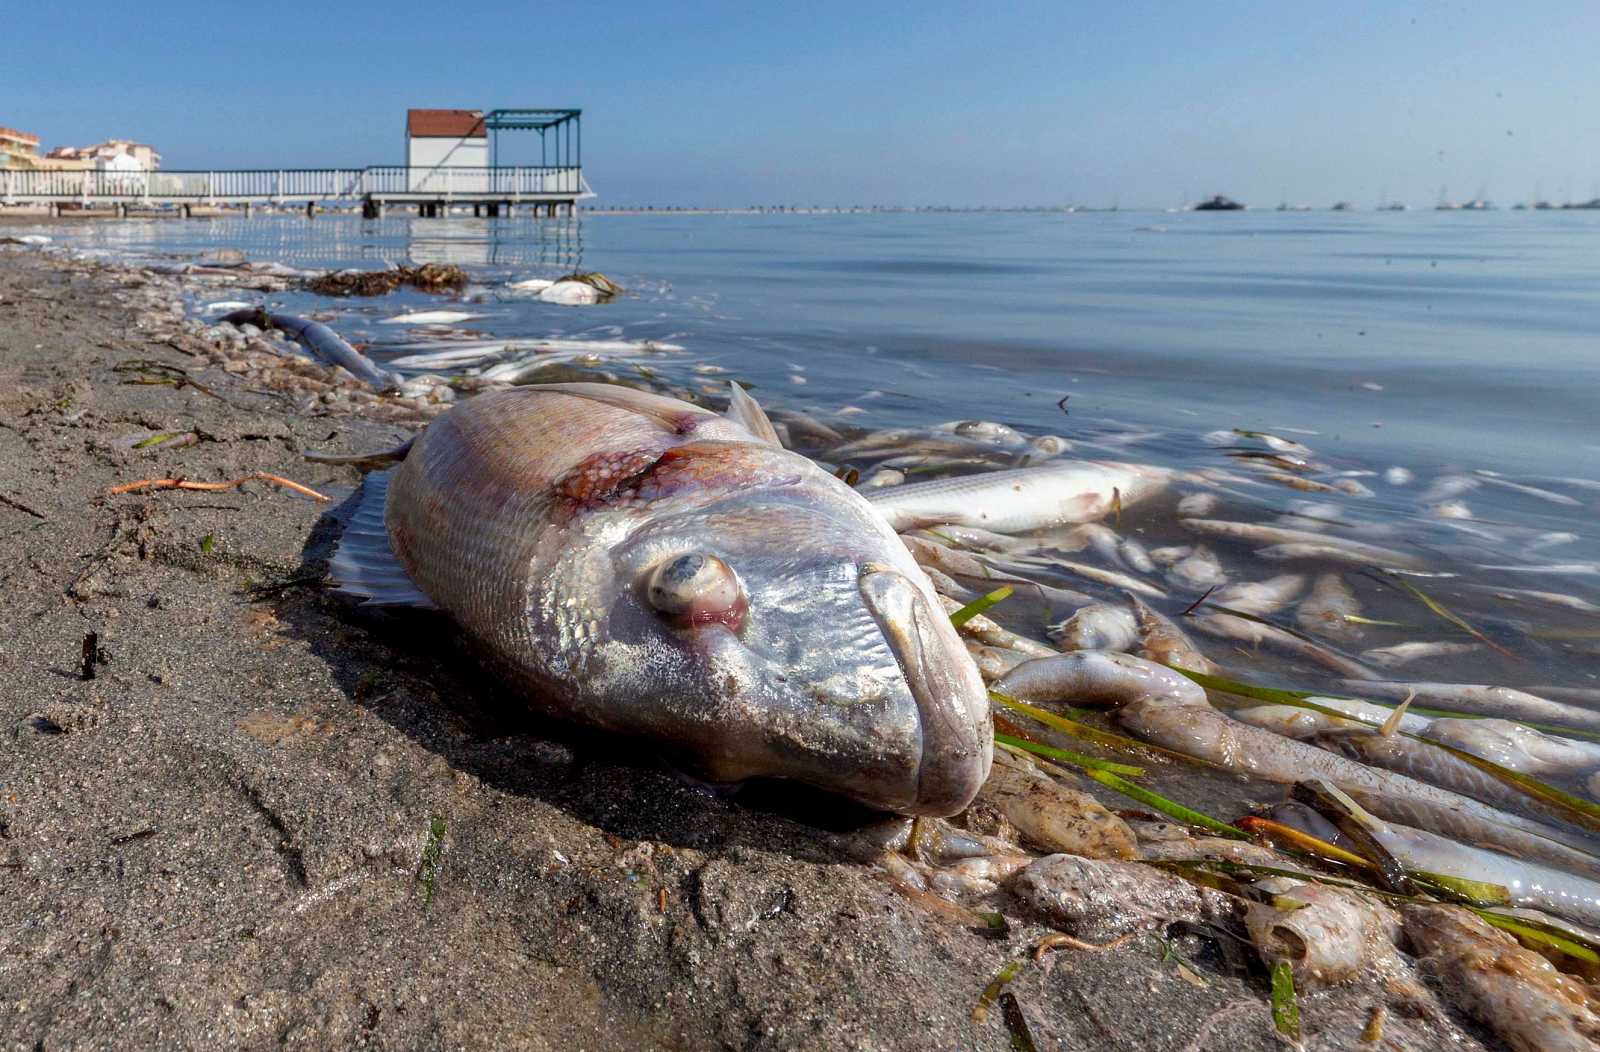 Mar Menor, with 180 square kilometers (69.5 square miles) of surface, is the largest permanent salt lagoon in Europe, and its fragile balance also depends on the contributions of the Mediterranean and terrestrial fresh water, which in turn, are responsible for the rich and threatened biodiversity it houses.